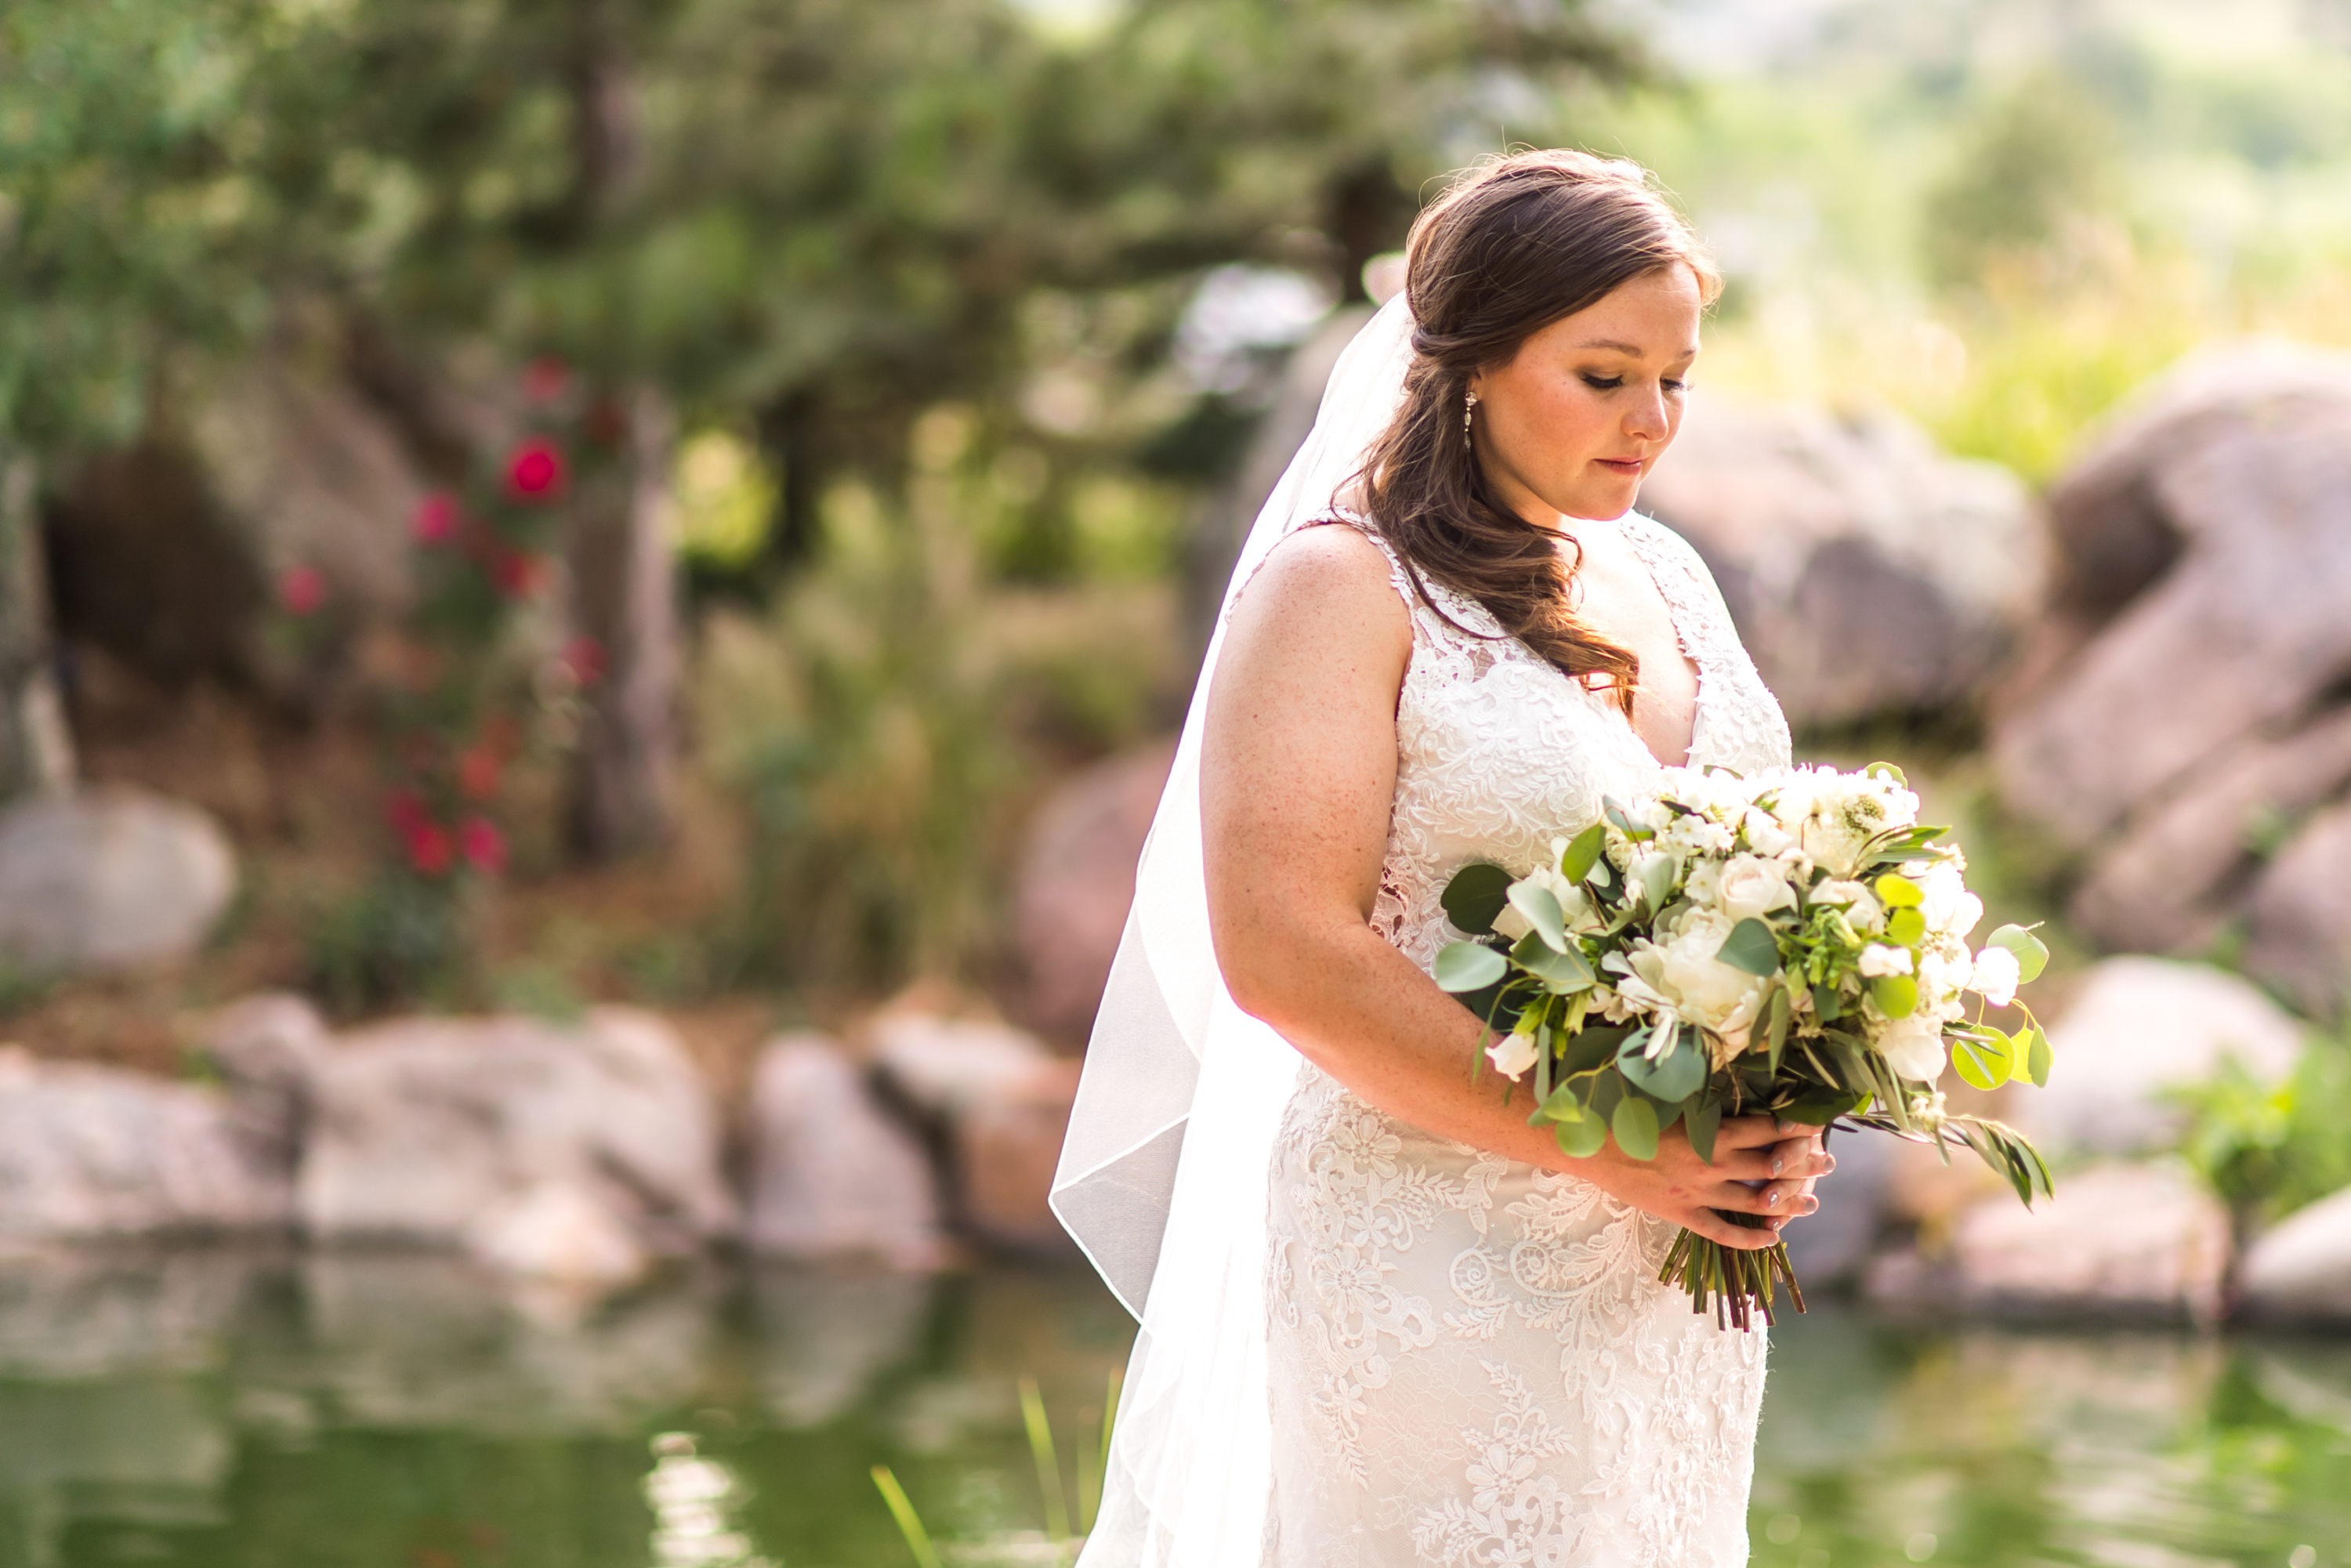 The bride looks down at her bouquet during a Greenbriar Inn wedding in Boulder, Colorado.